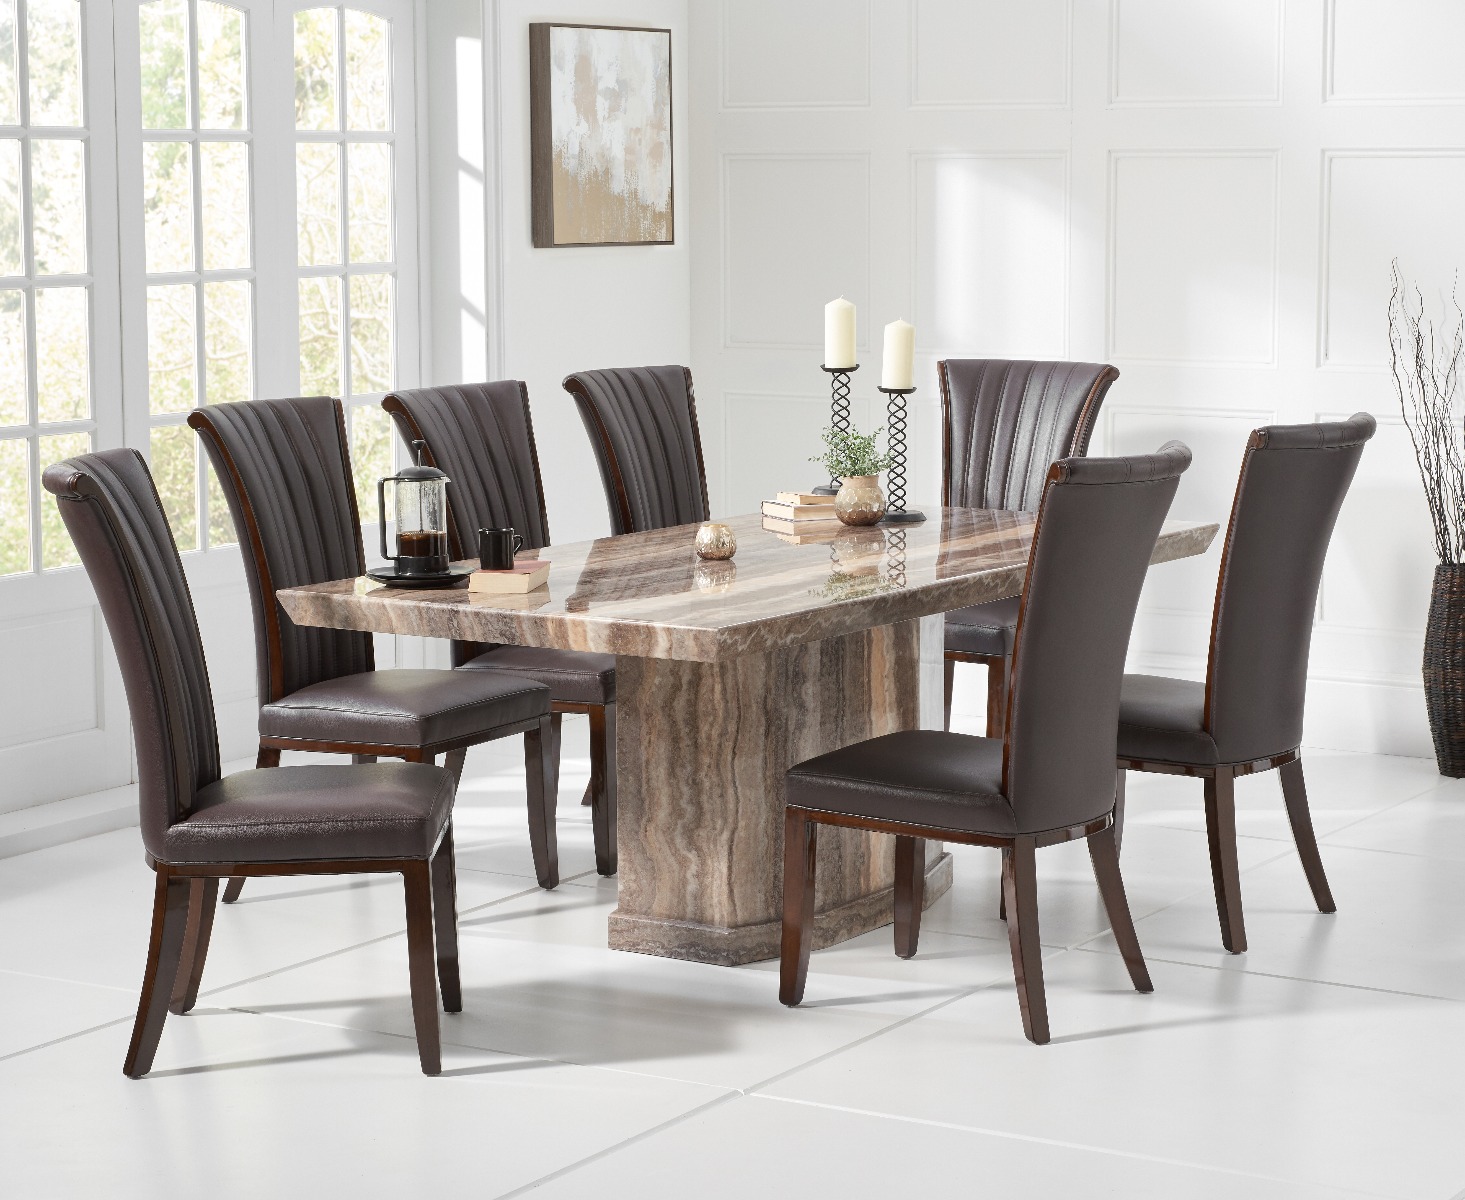 Carvelle 200cm Brown Pedestal Marble Dining Table With 6 Brown Alpine Chairs